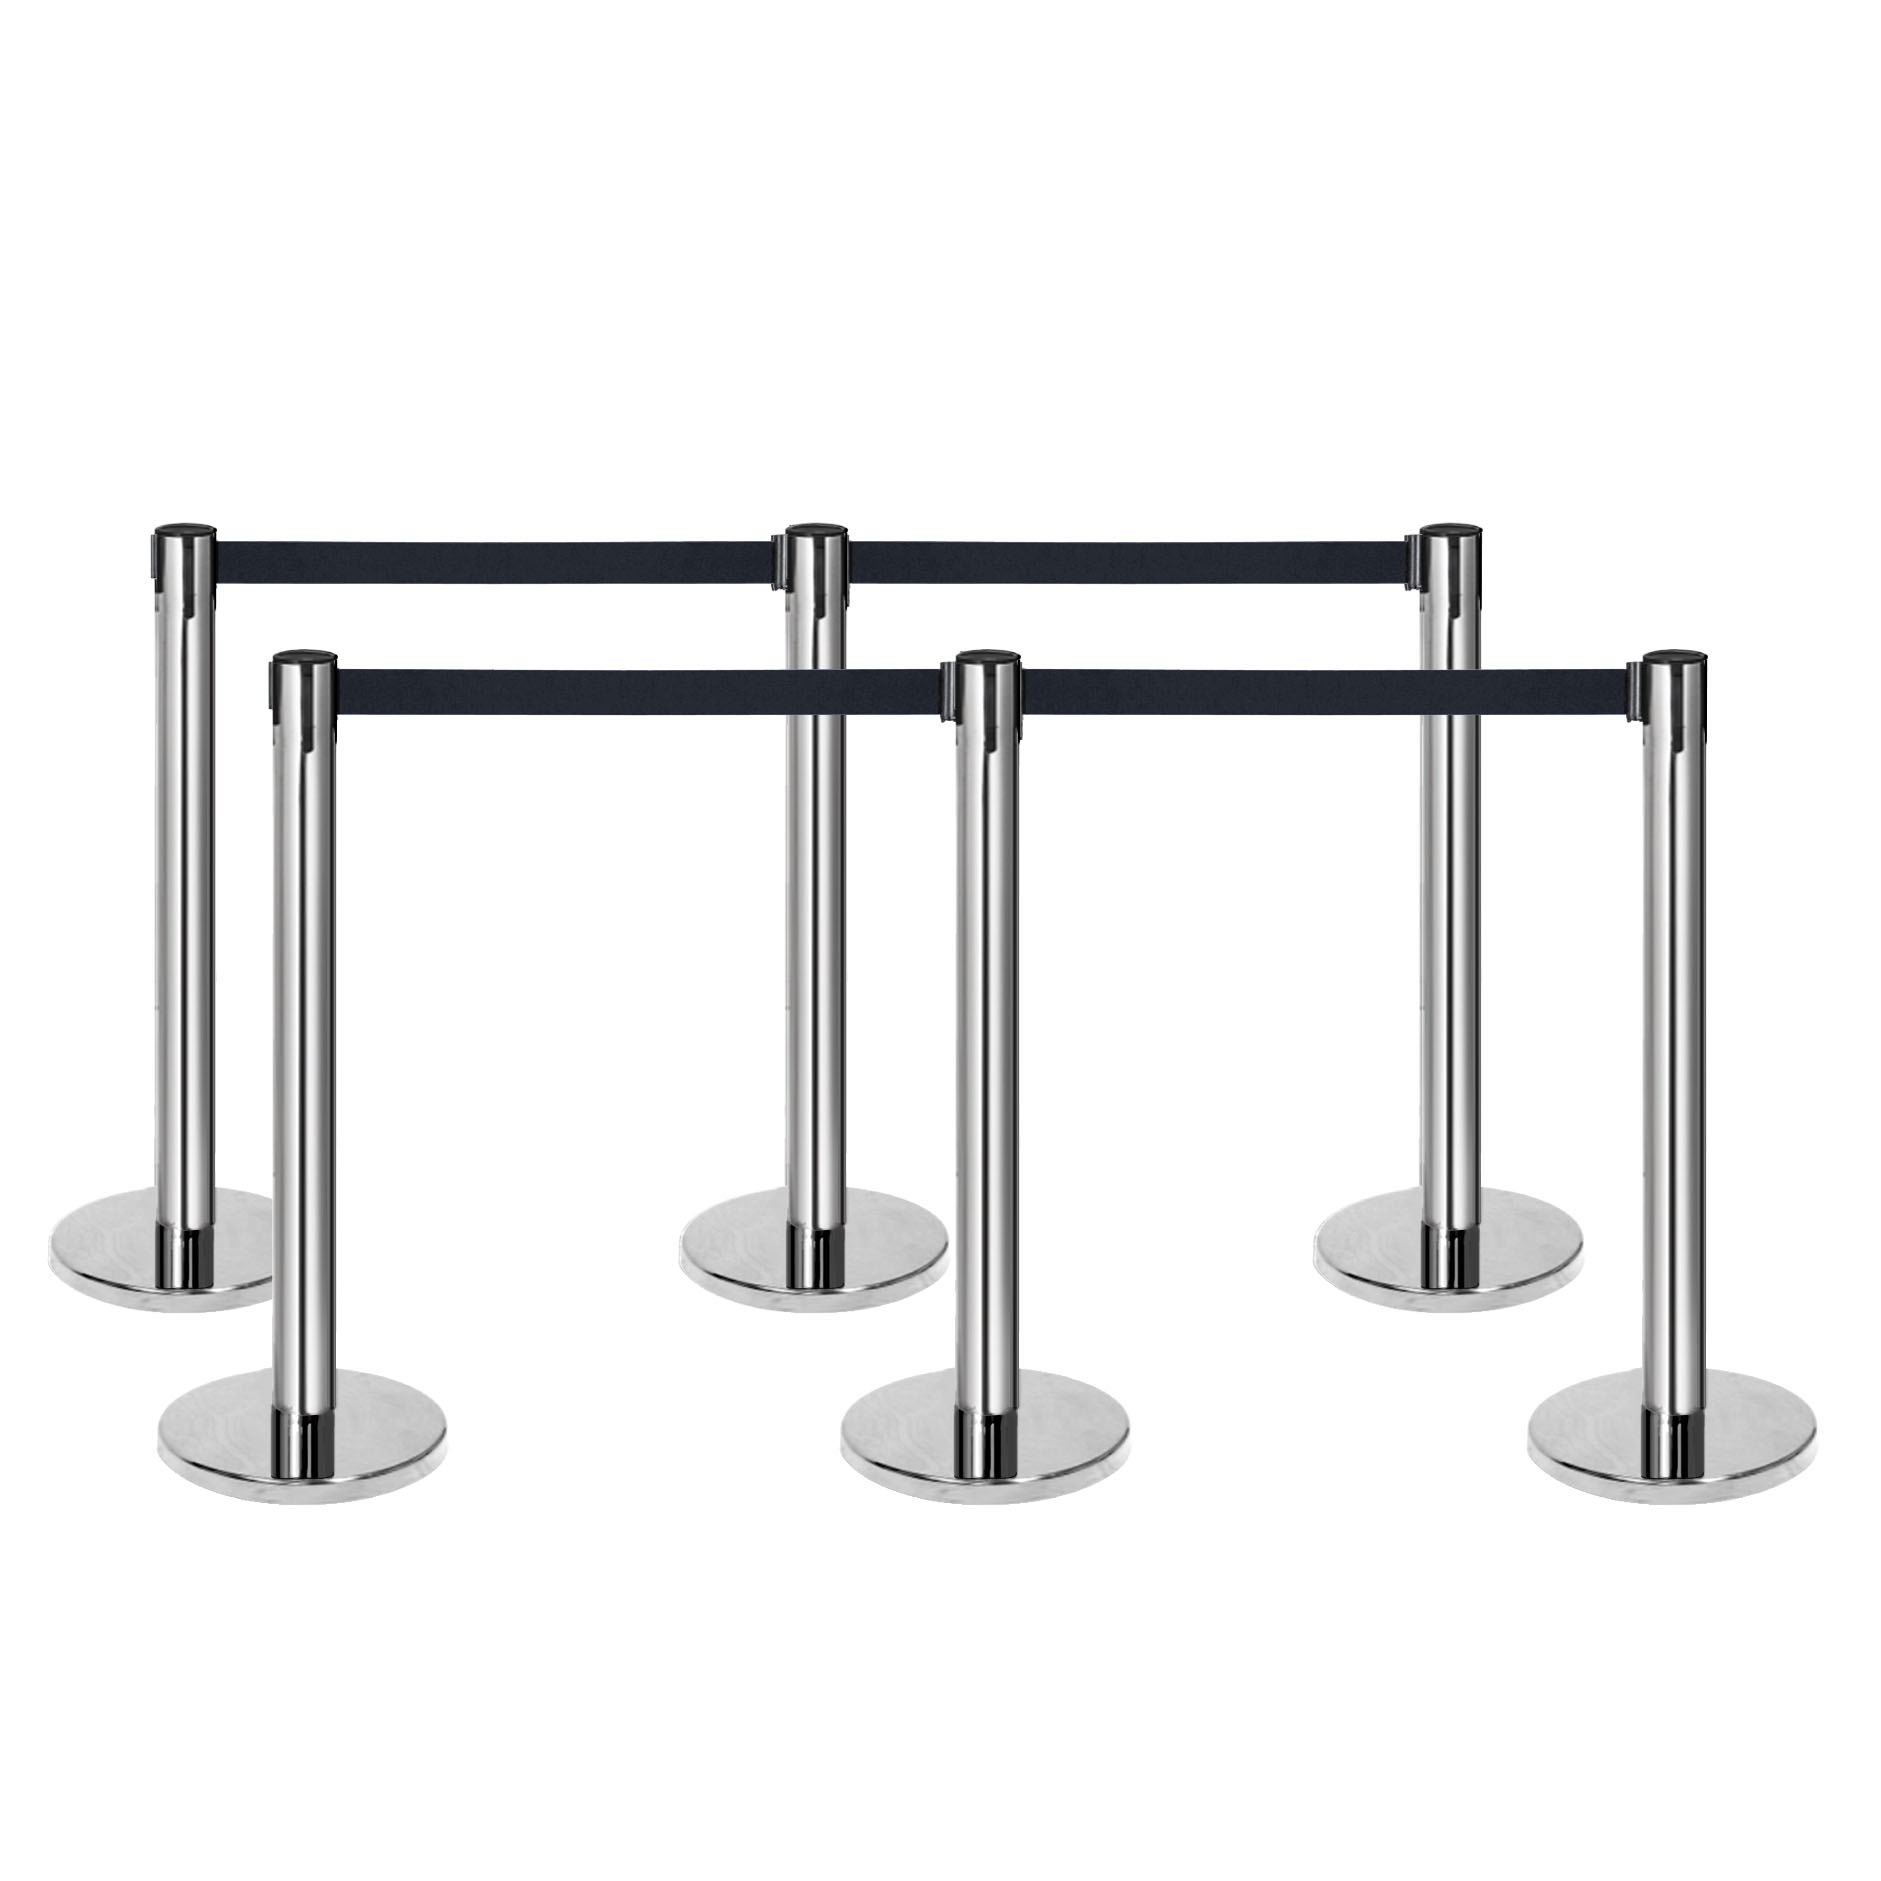 S/Steel Set of Two Tensator Retractable Barrier Posts Stanchions 7'6" Strap 